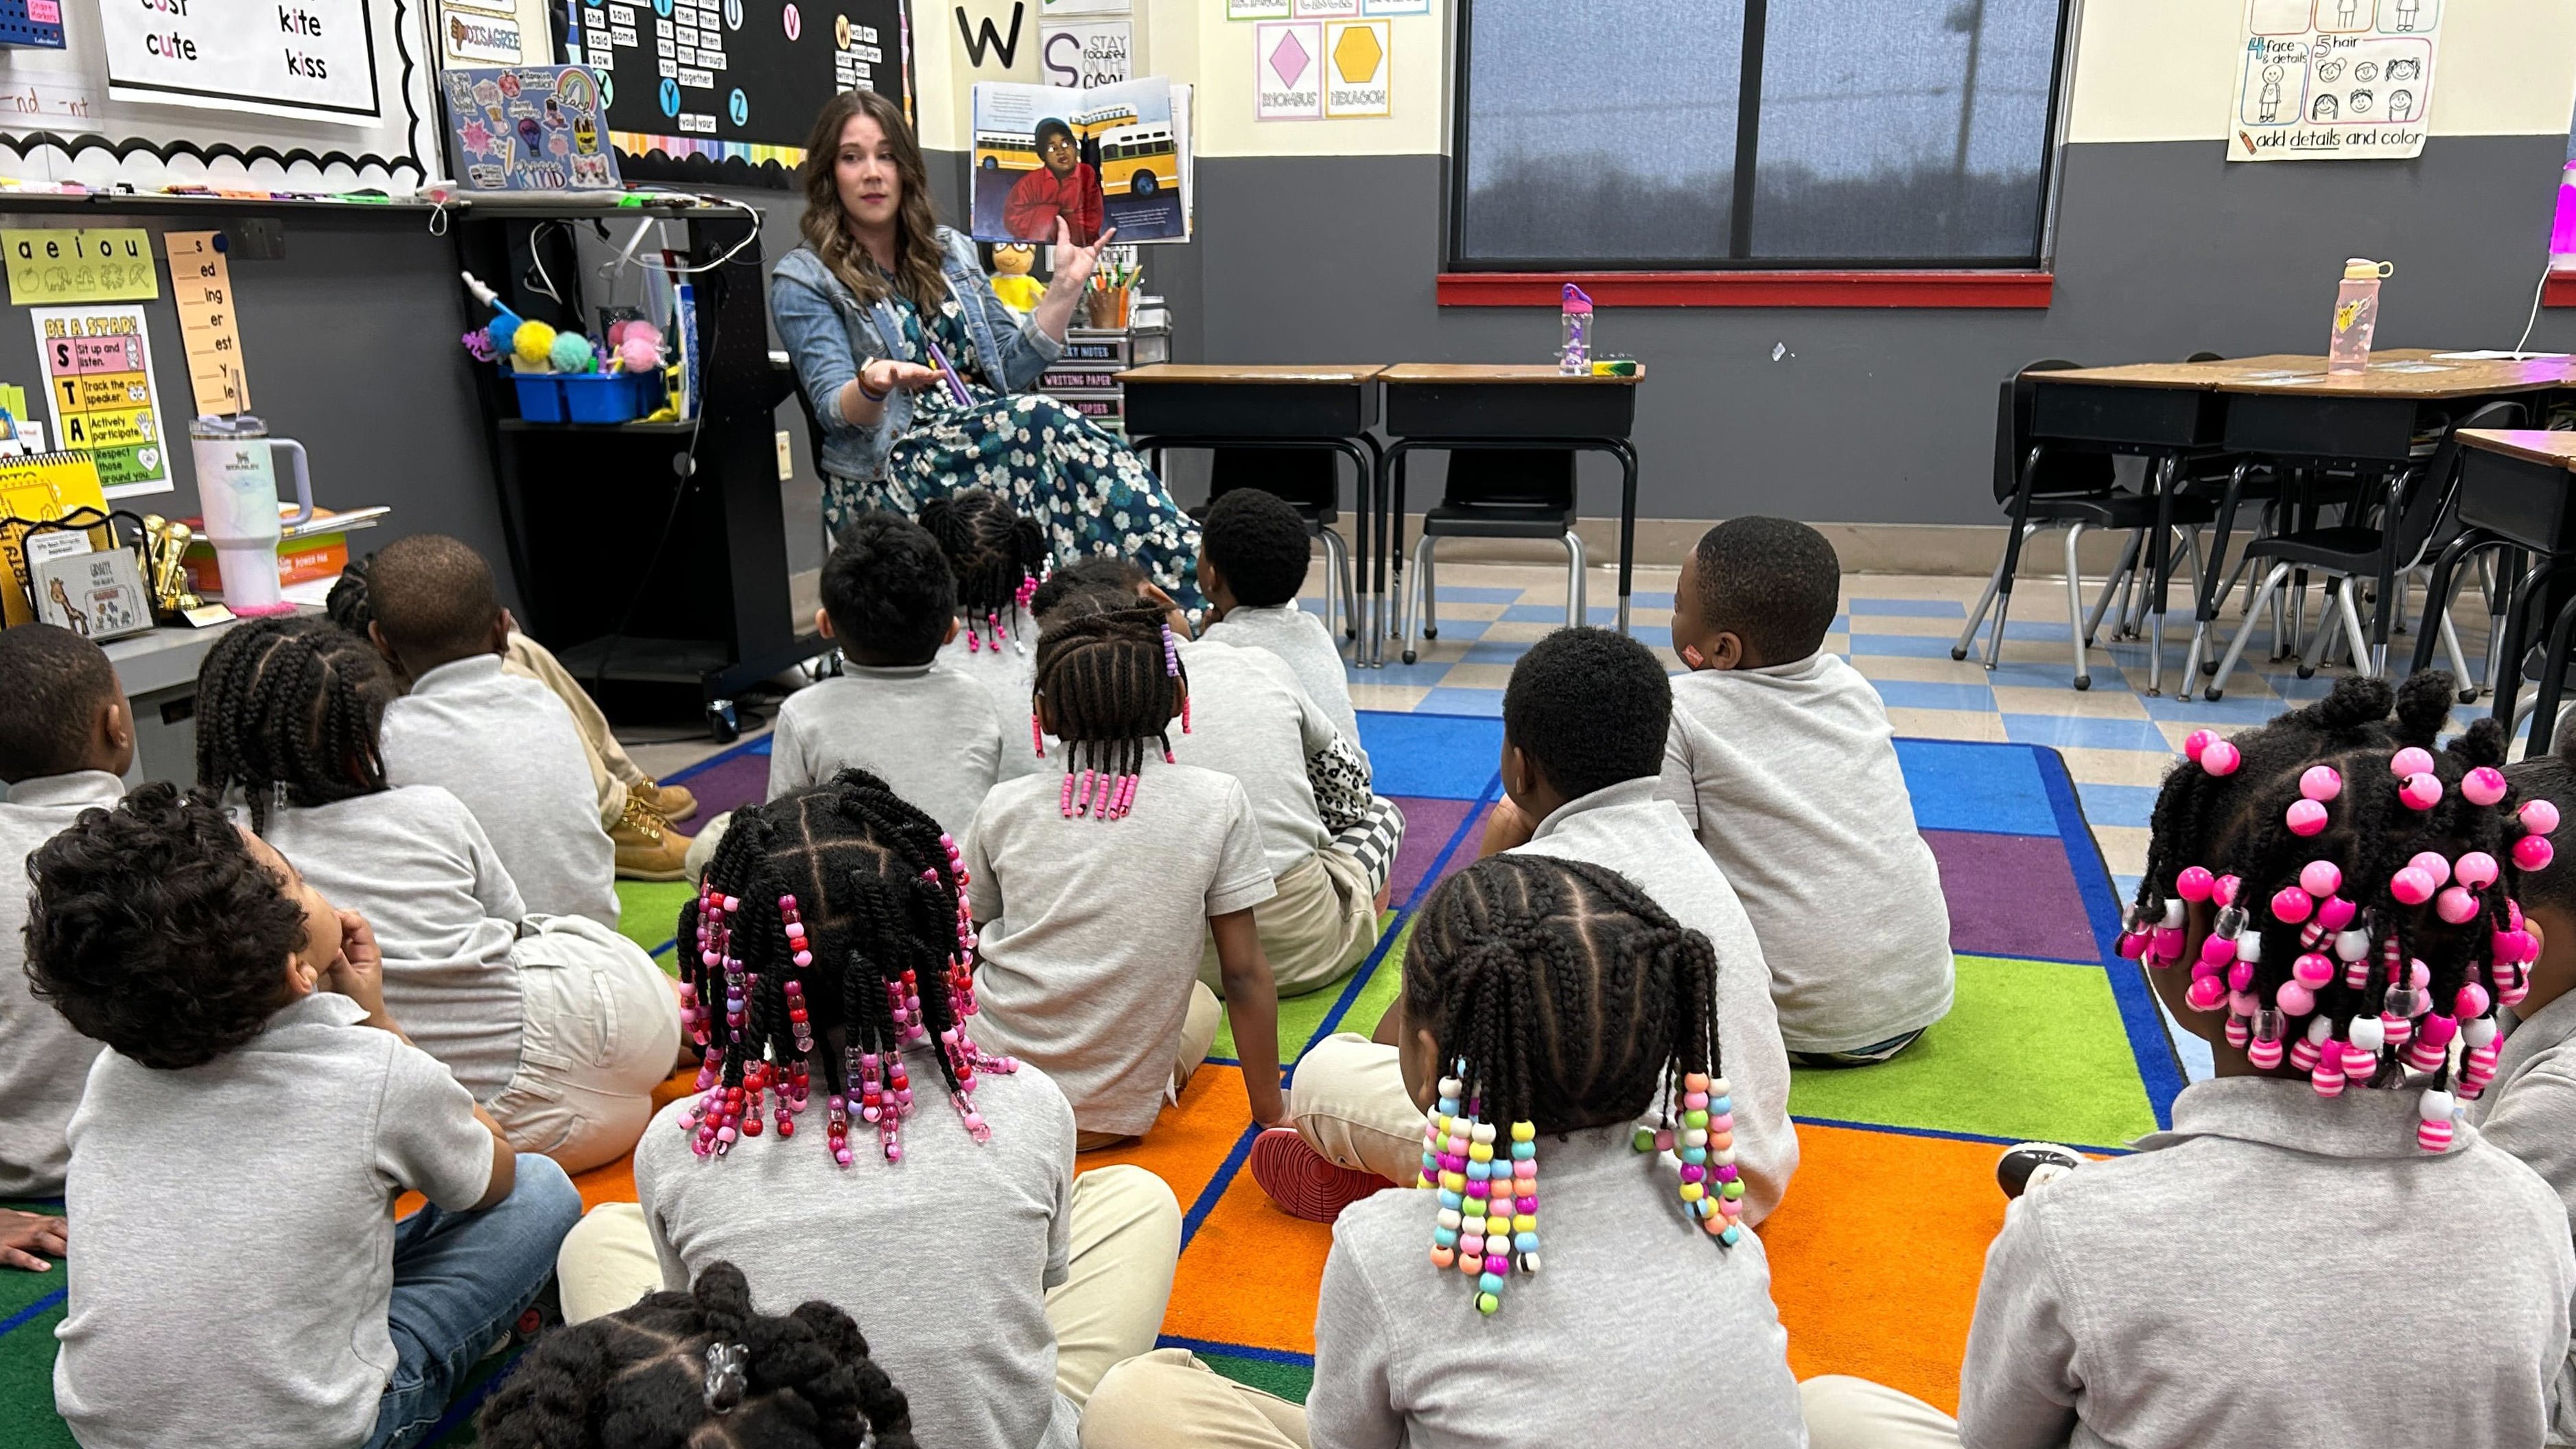 A teacher with long brown hair holds up a picture book to a class full of young students sitting on a colorful rug in a classroom. Students are wearing a grey shirt and light tan pants as a uniform and many students have colorful beads in their braids.